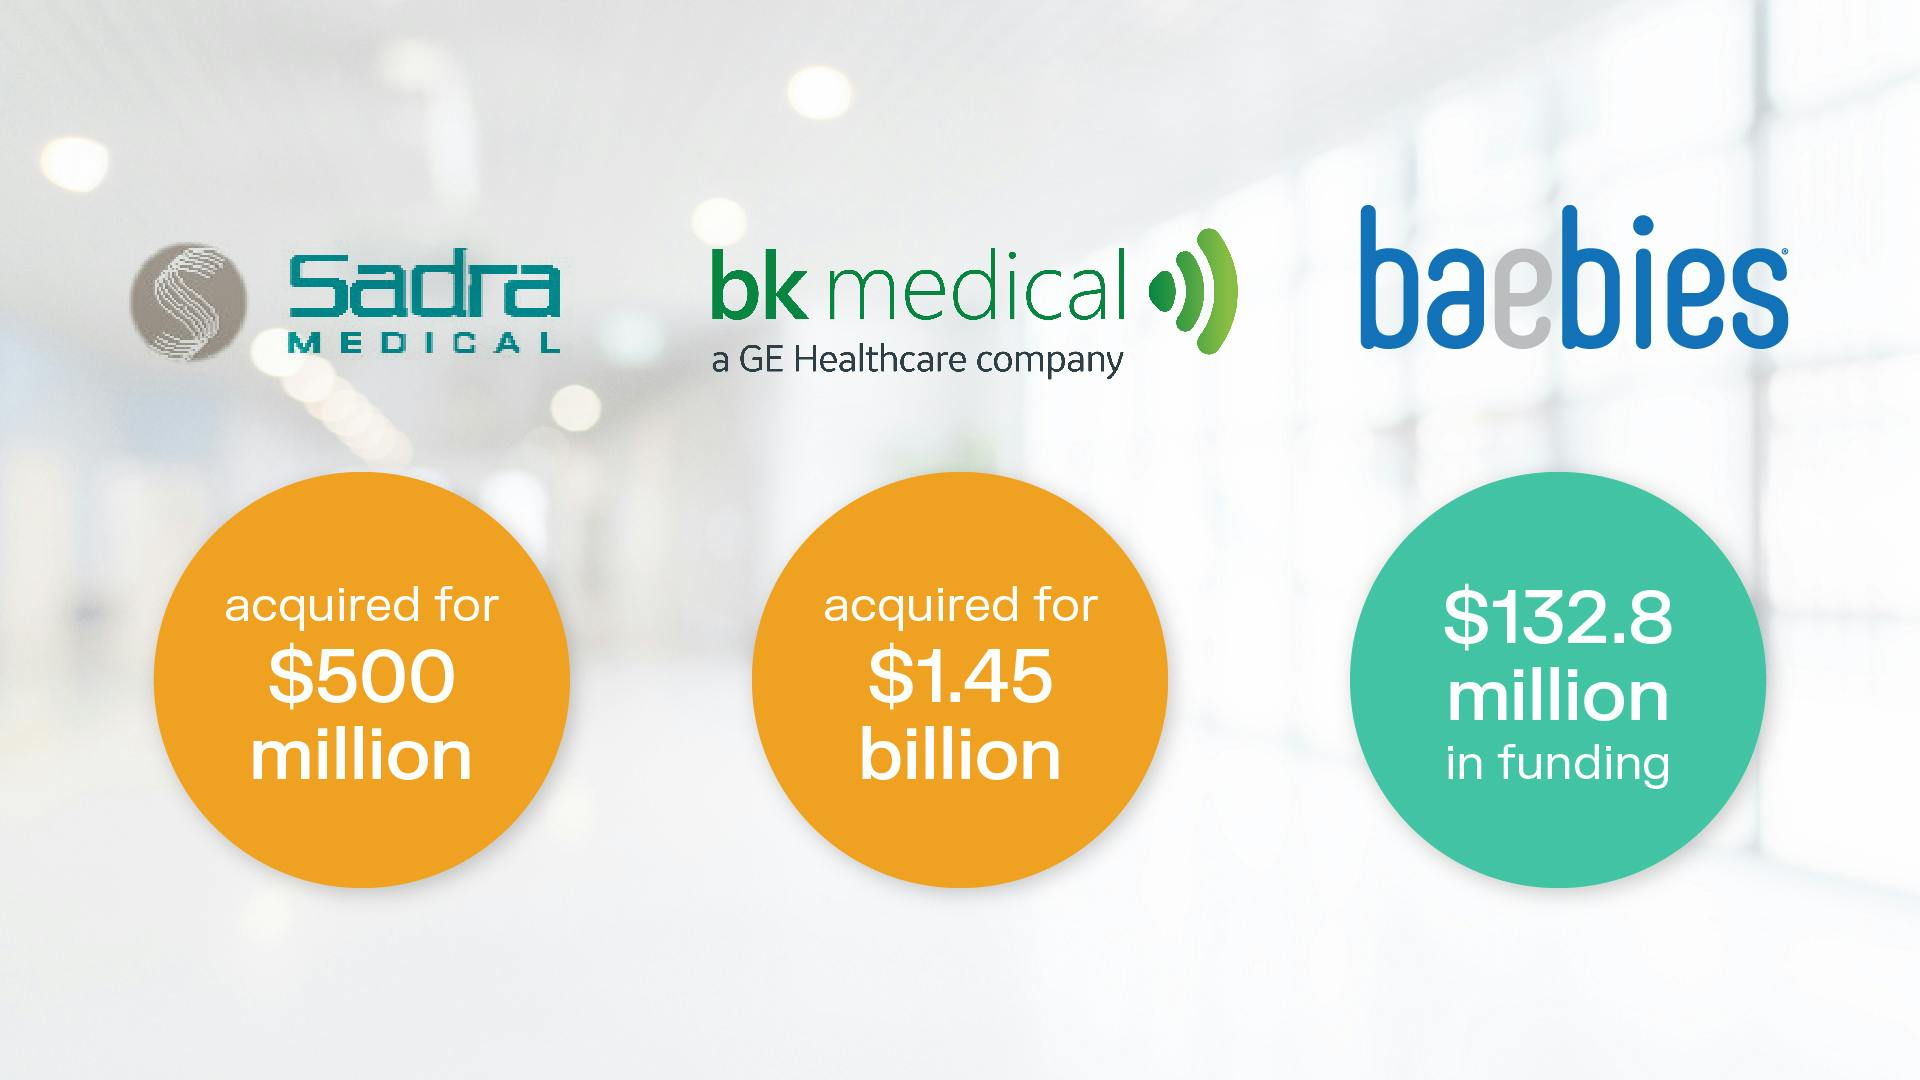 Delve Startup clients: Sandra Medical, acquired for $500 million. BK Medical, a GE Healthcare company, acquired for $1.45 billion. Baebies, $132.8 million.